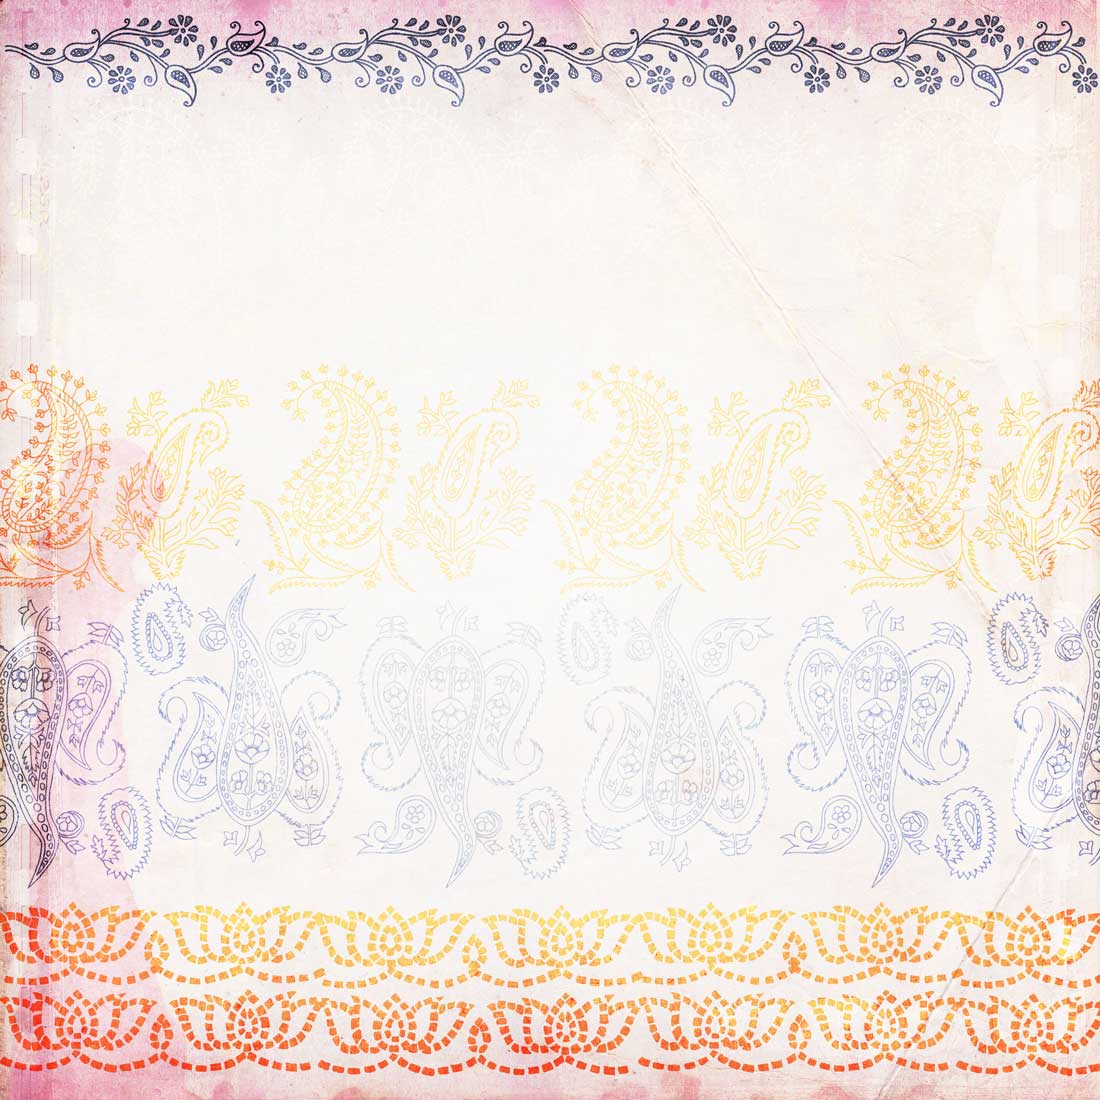 nbk-colors-of-india-papers-01